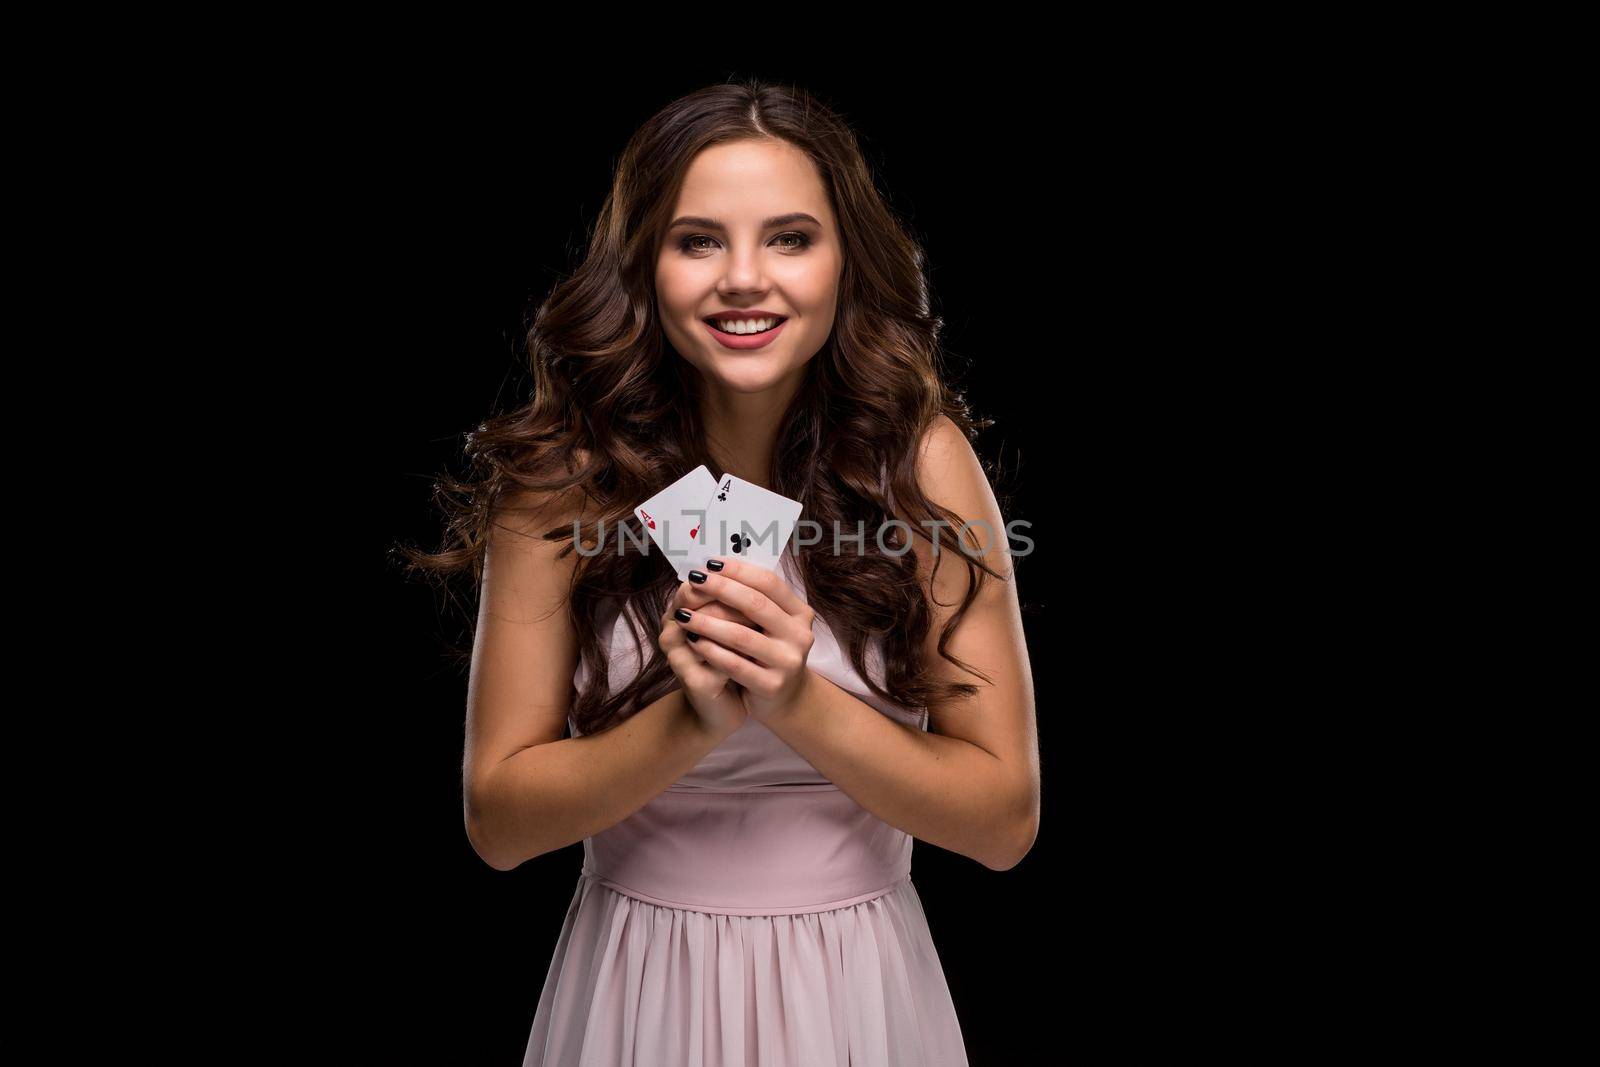 Attractive young woman in a sexy light dress holding the winning combination of poker cards. Two Aces. Studio shot on a black background. Casino